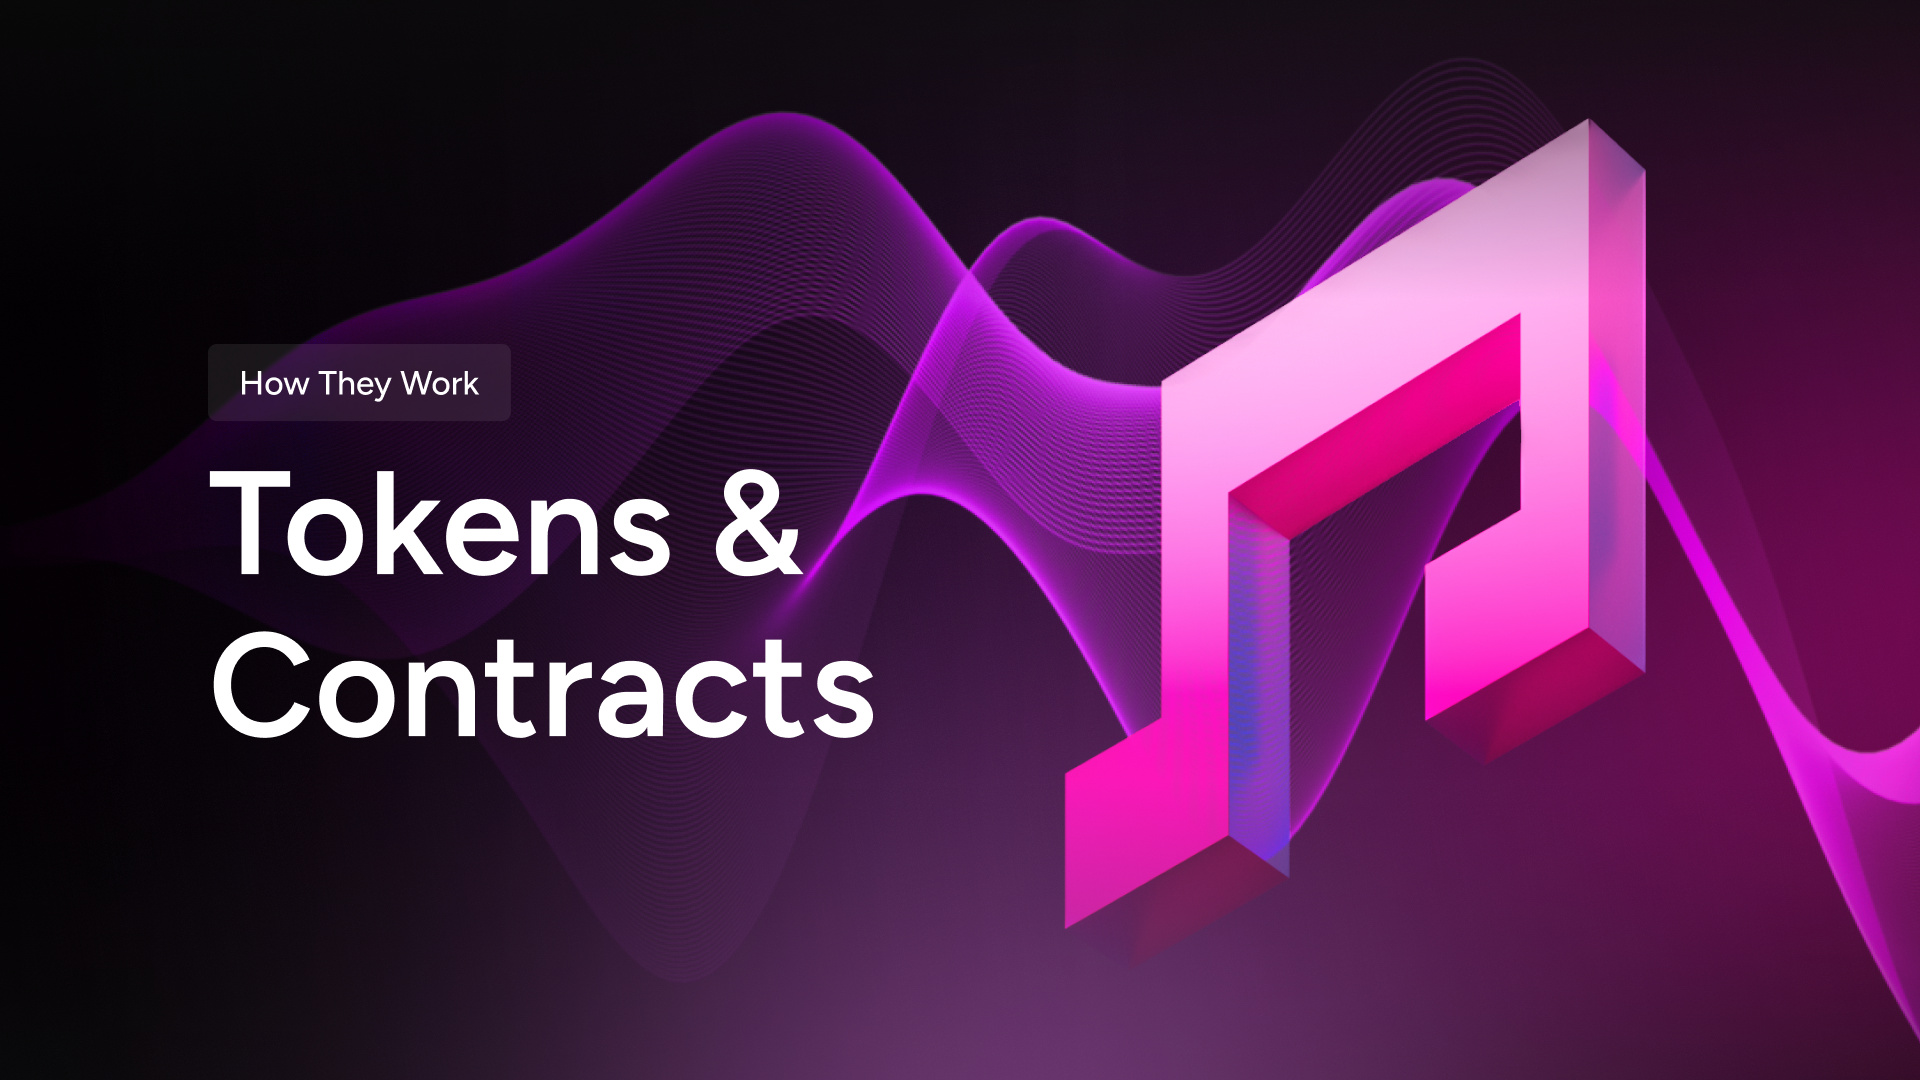 Smart contracts are revolutionizing the ways we own and interact with digital assets.